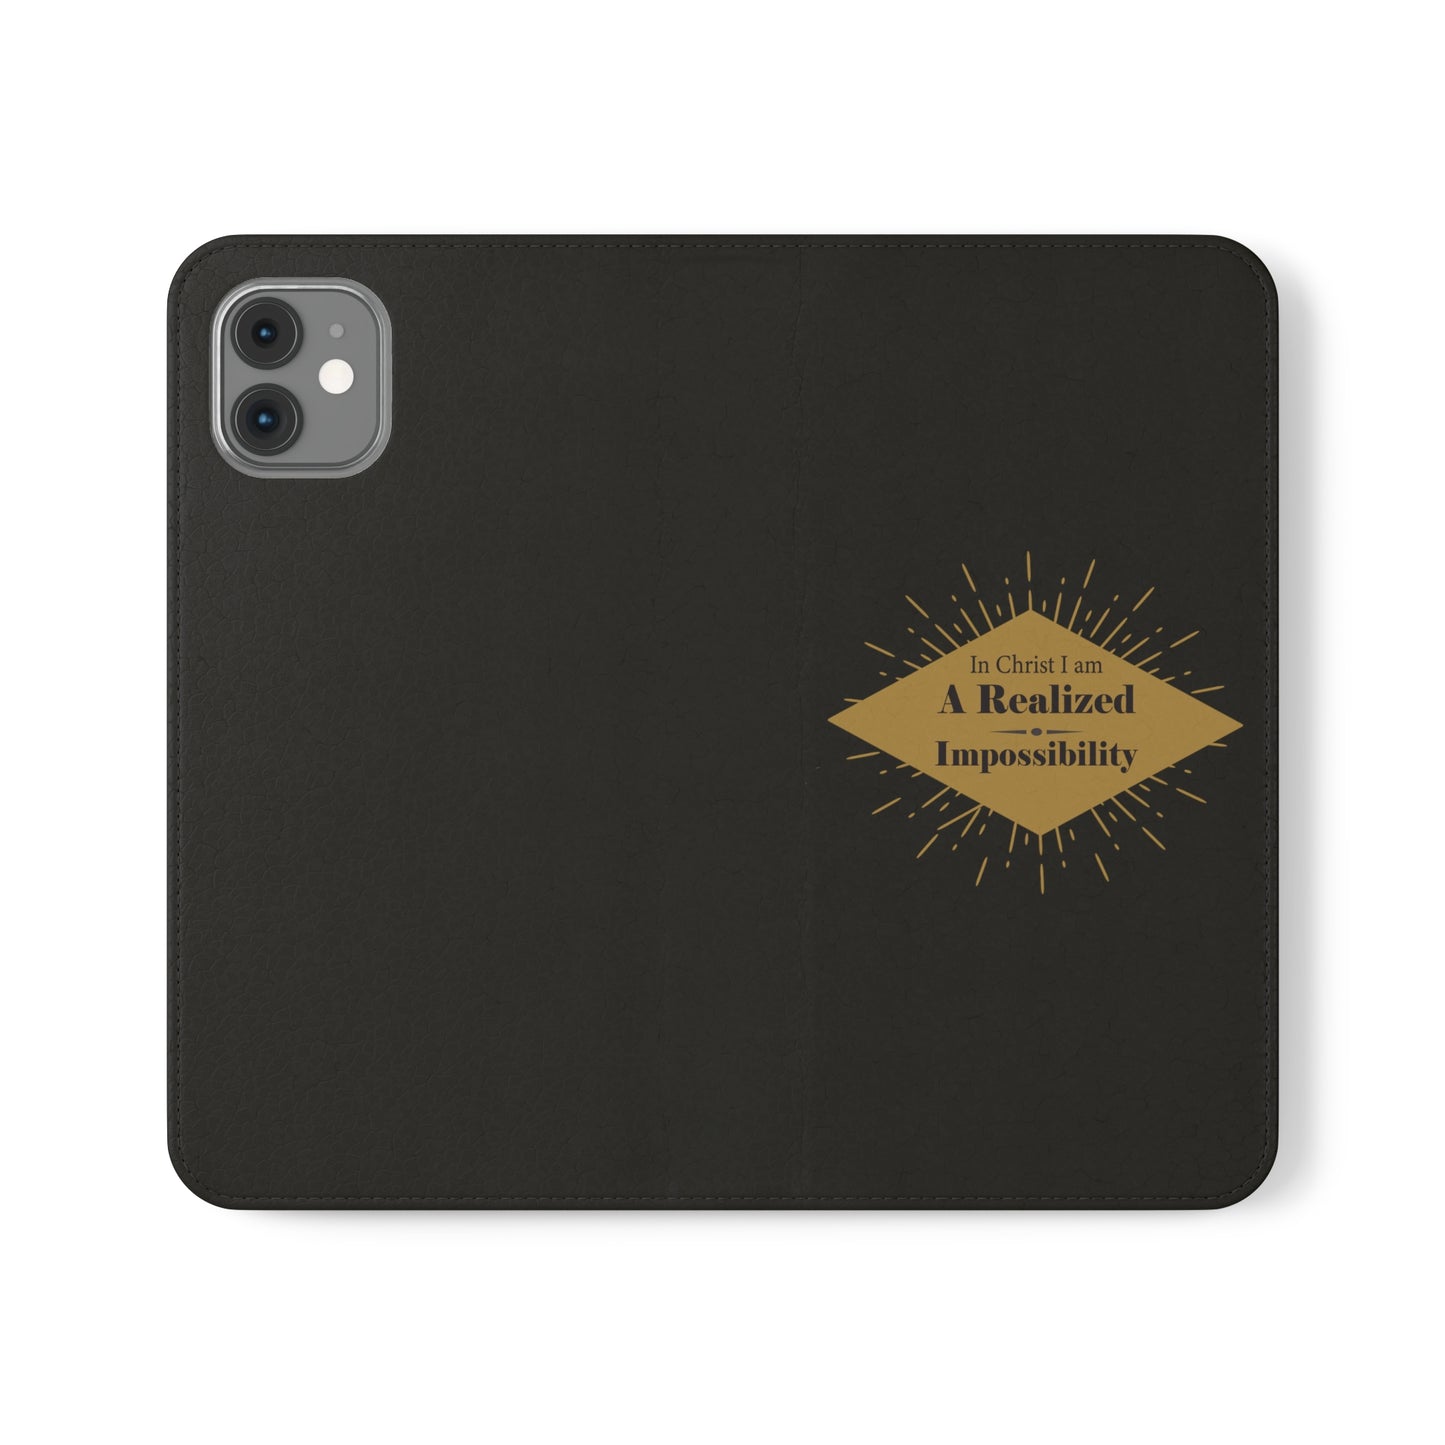 In Christ I Am A Realized Impossibility Phone Flip Cases